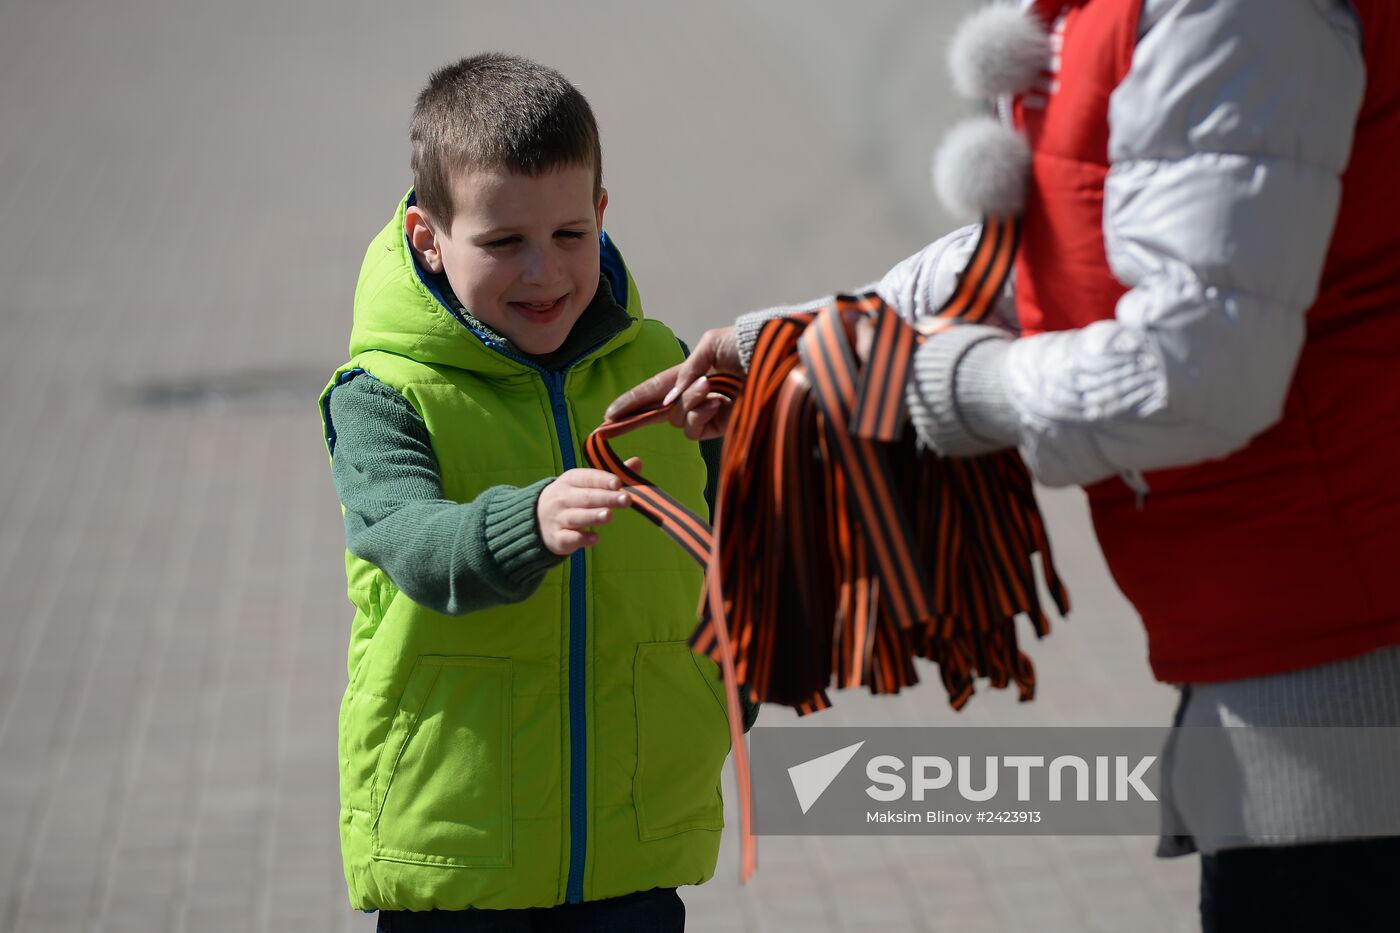 Distribution of Saint George Ribbons in Moscow